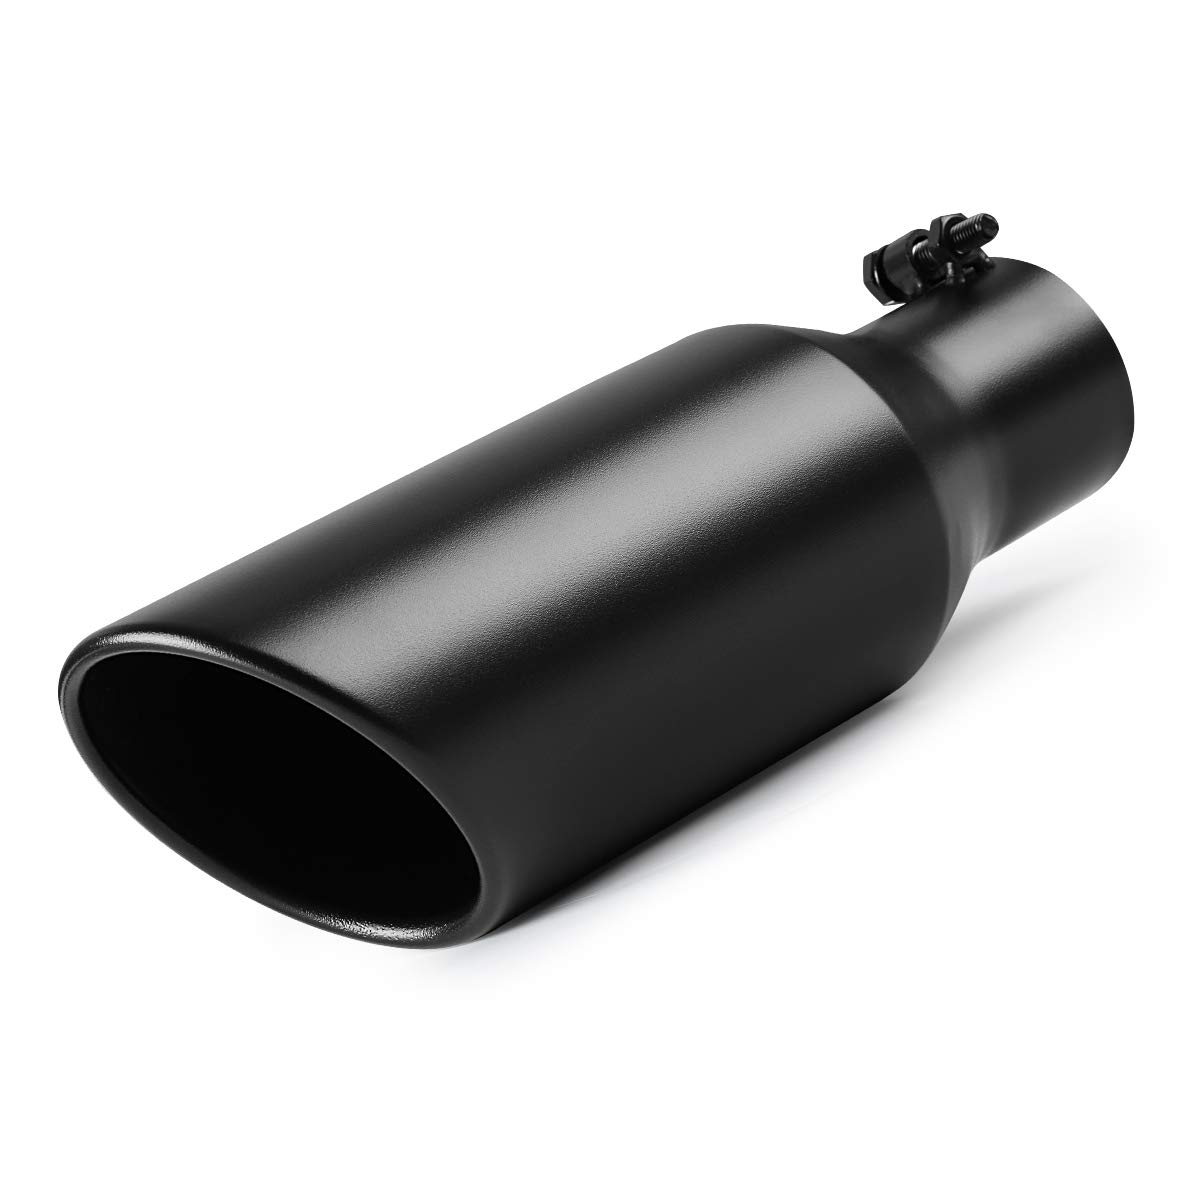 A-KARCK Exhaust Tip 2.5 Inch Inlet, 2.5” Inlet 4” Outlet 12” Long Black Coated Finish Muffler Tip For Truck Tailpipe, Stainless Steel Rolled Edge